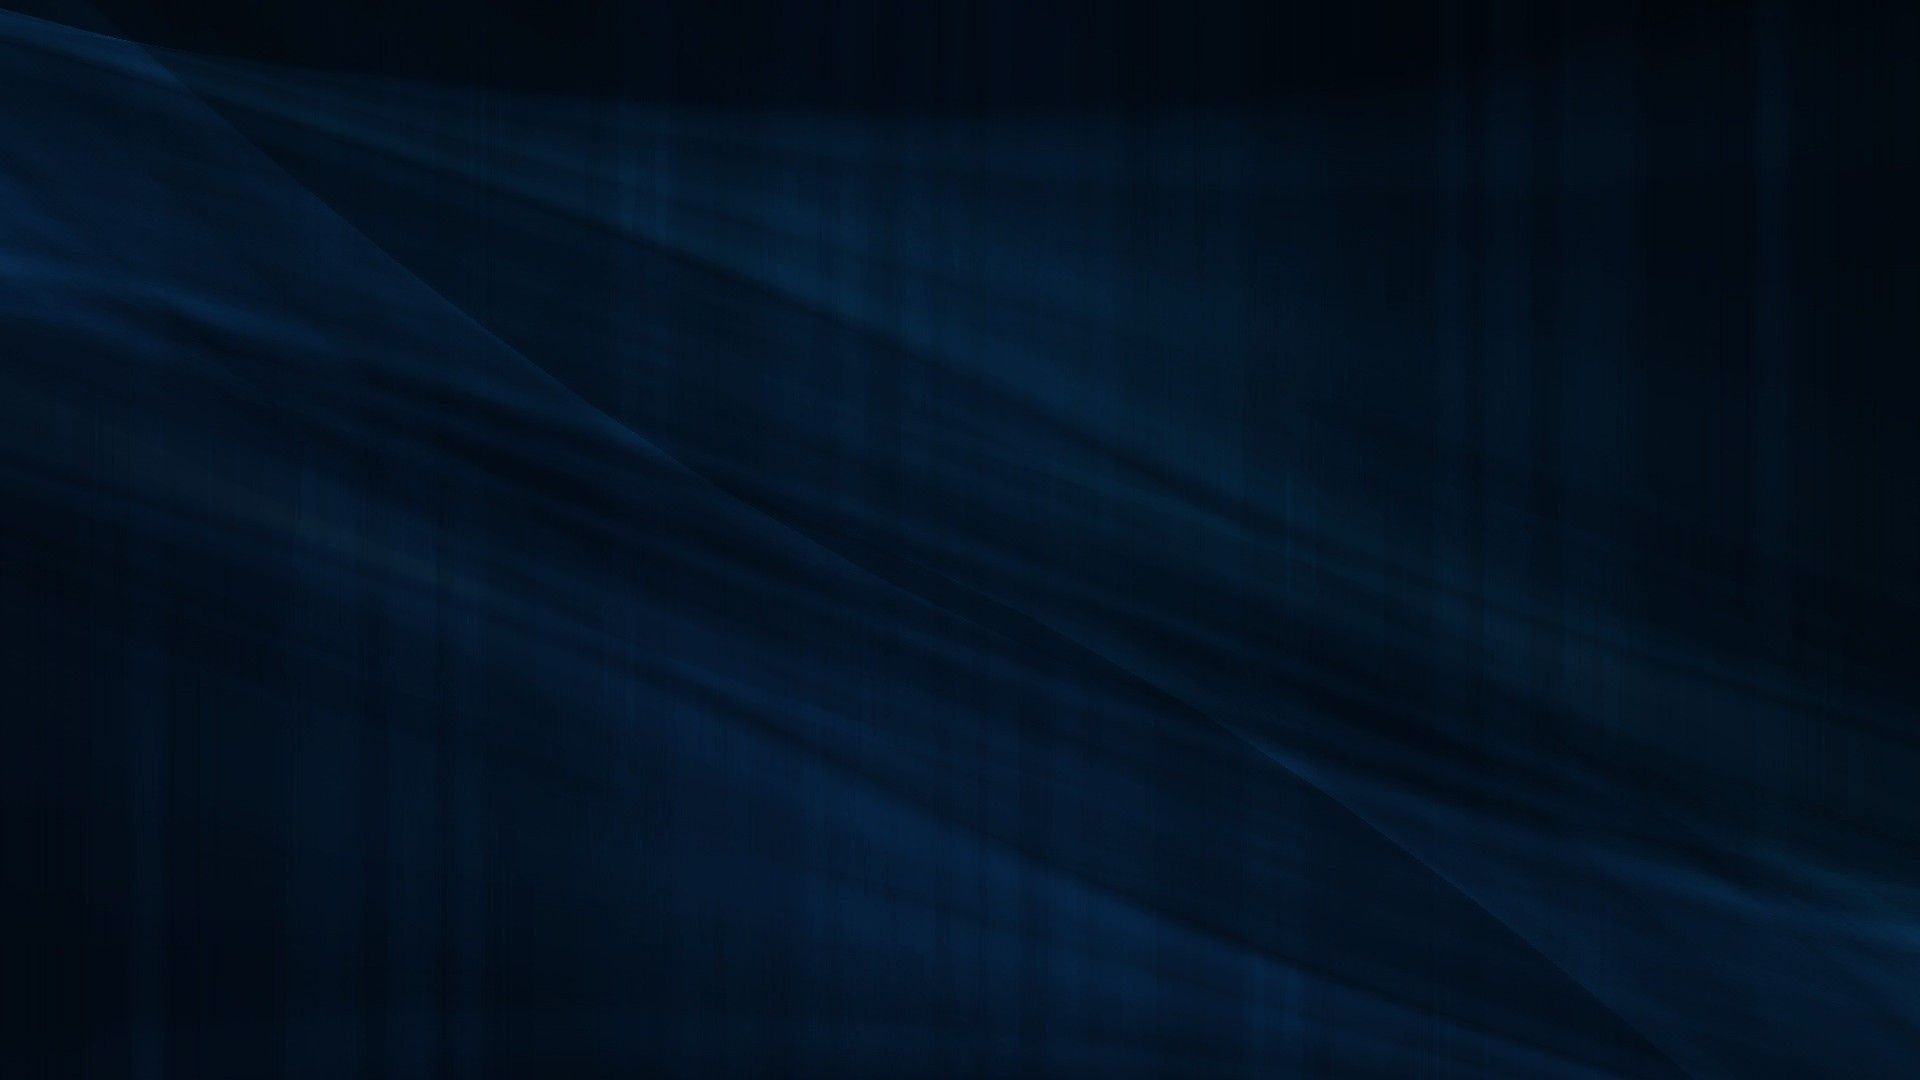 Black and Blue Abstract Wallpaper background picture